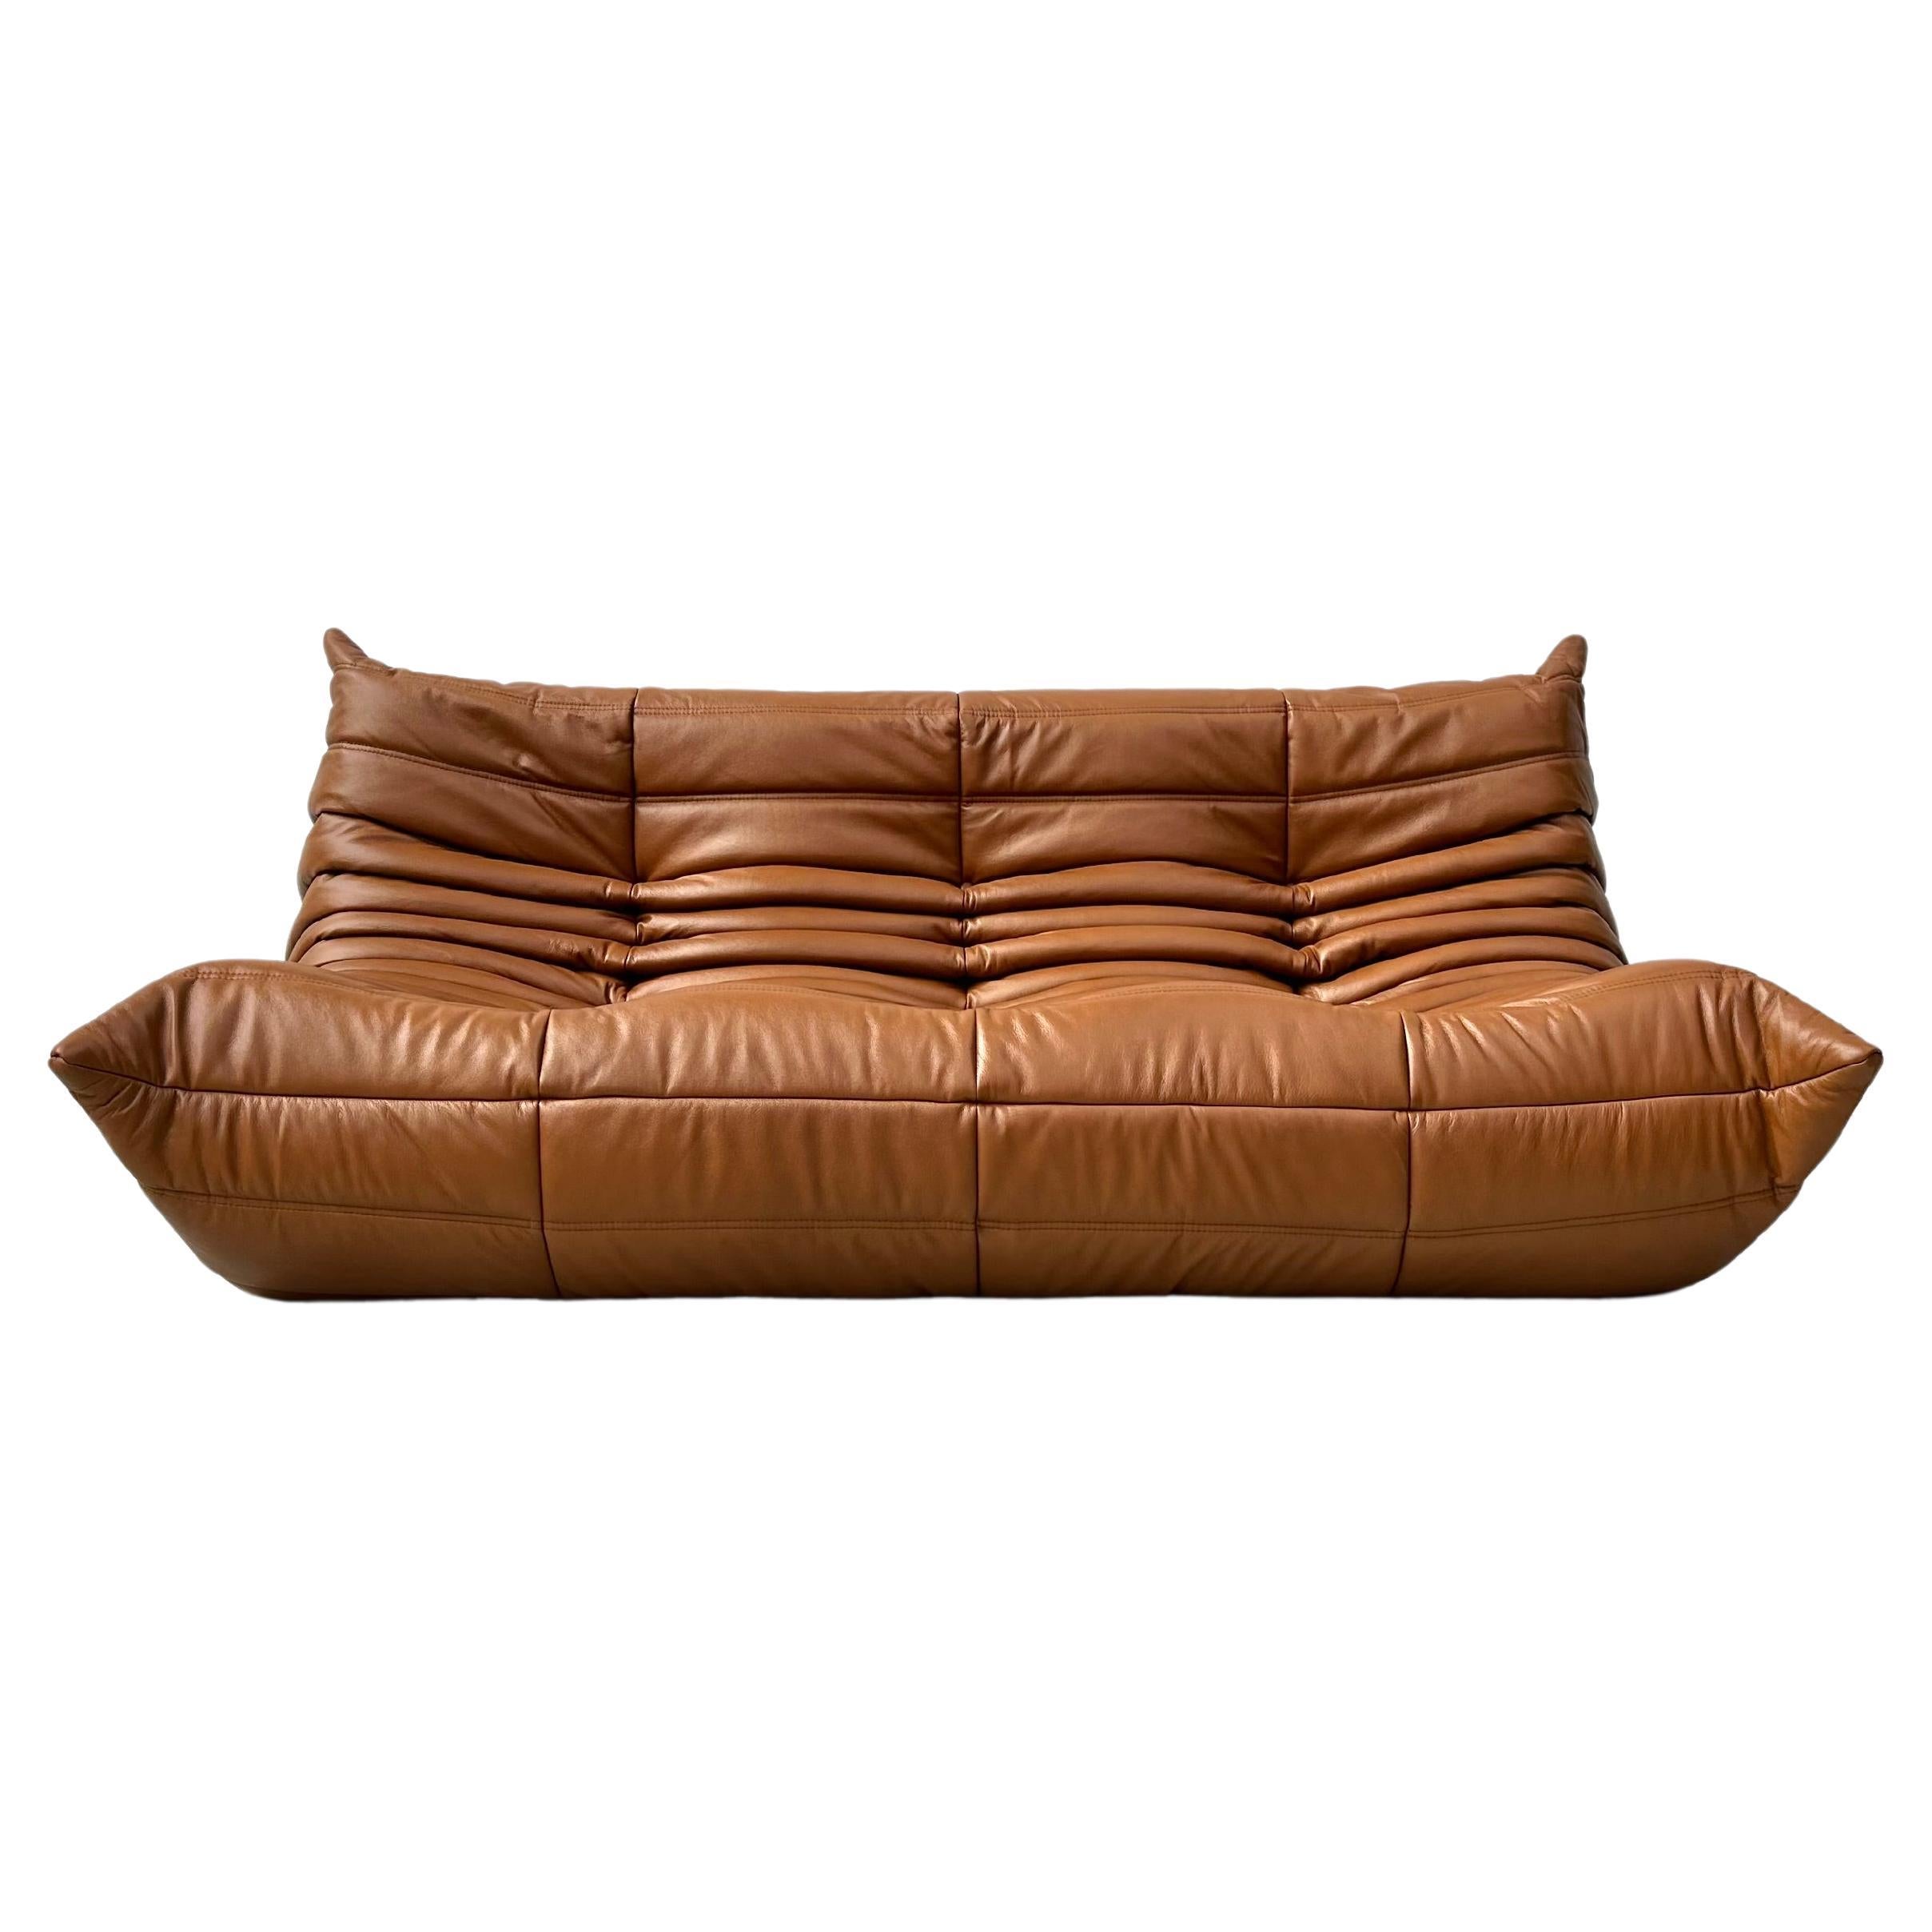 French Togo Sofa in Cognac Leather by Michel Ducaroy for Ligne Roset.